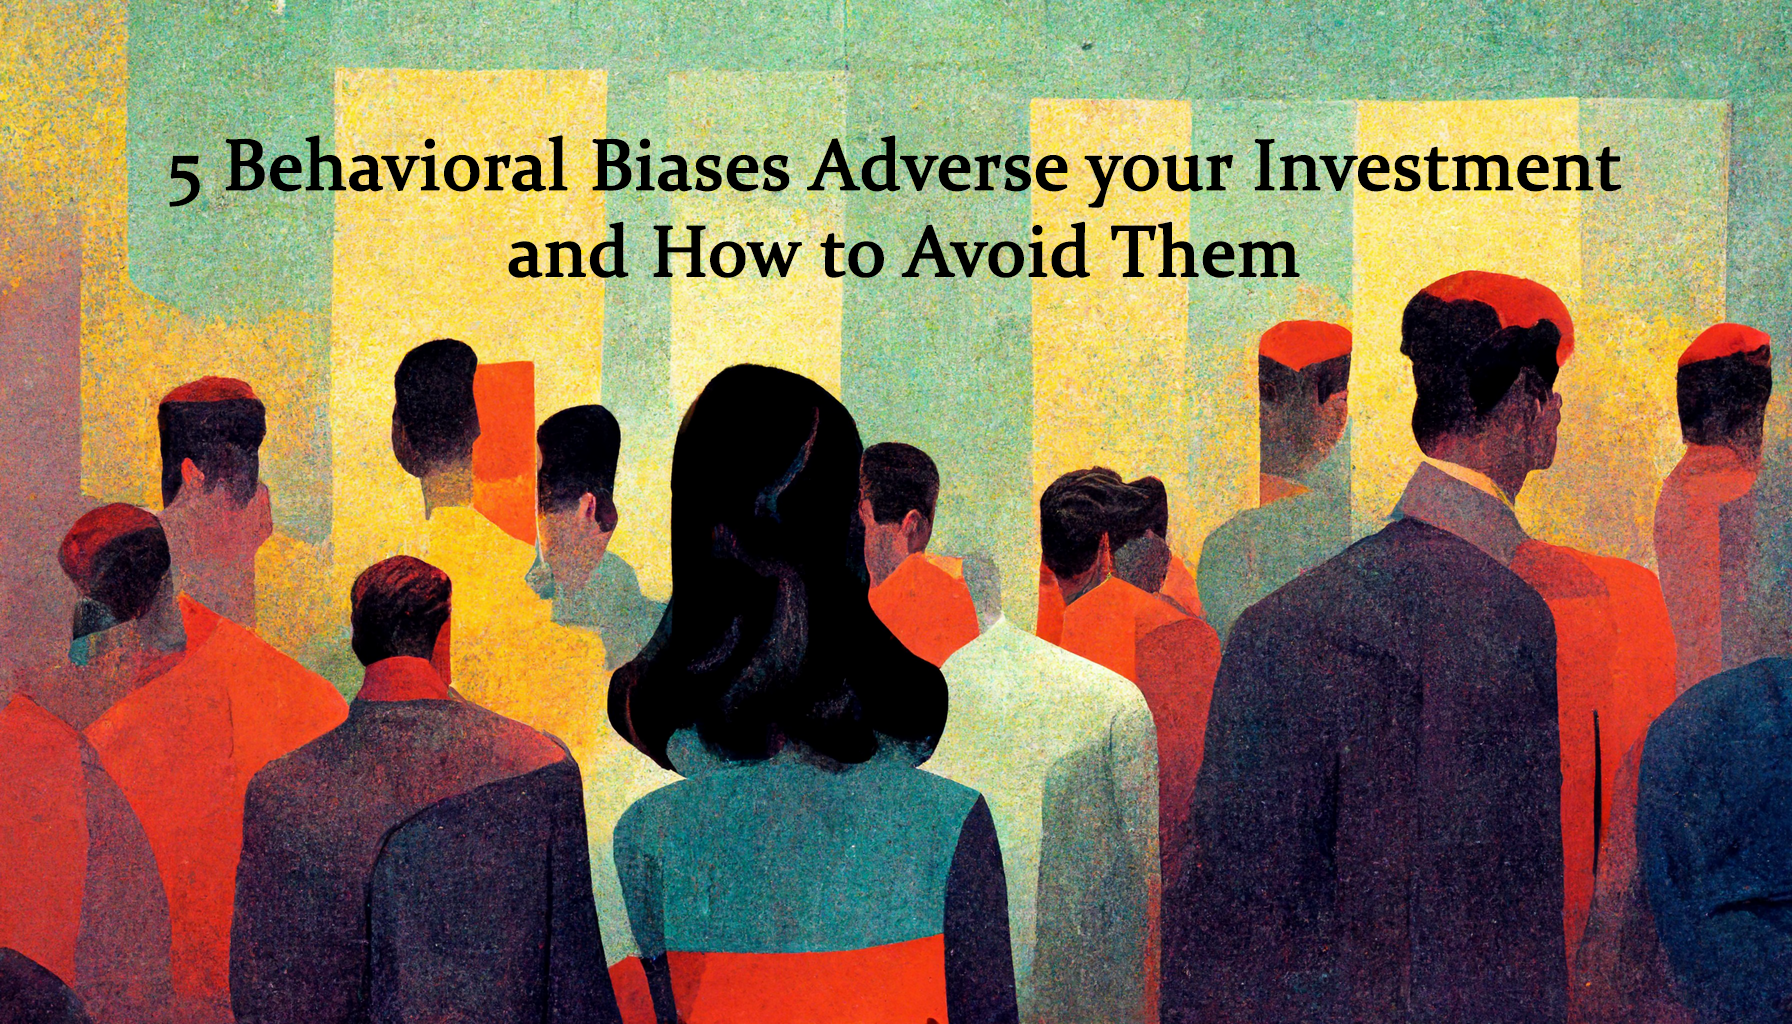 Behavioral Biases Adverse your Investment and How to Avoid Them